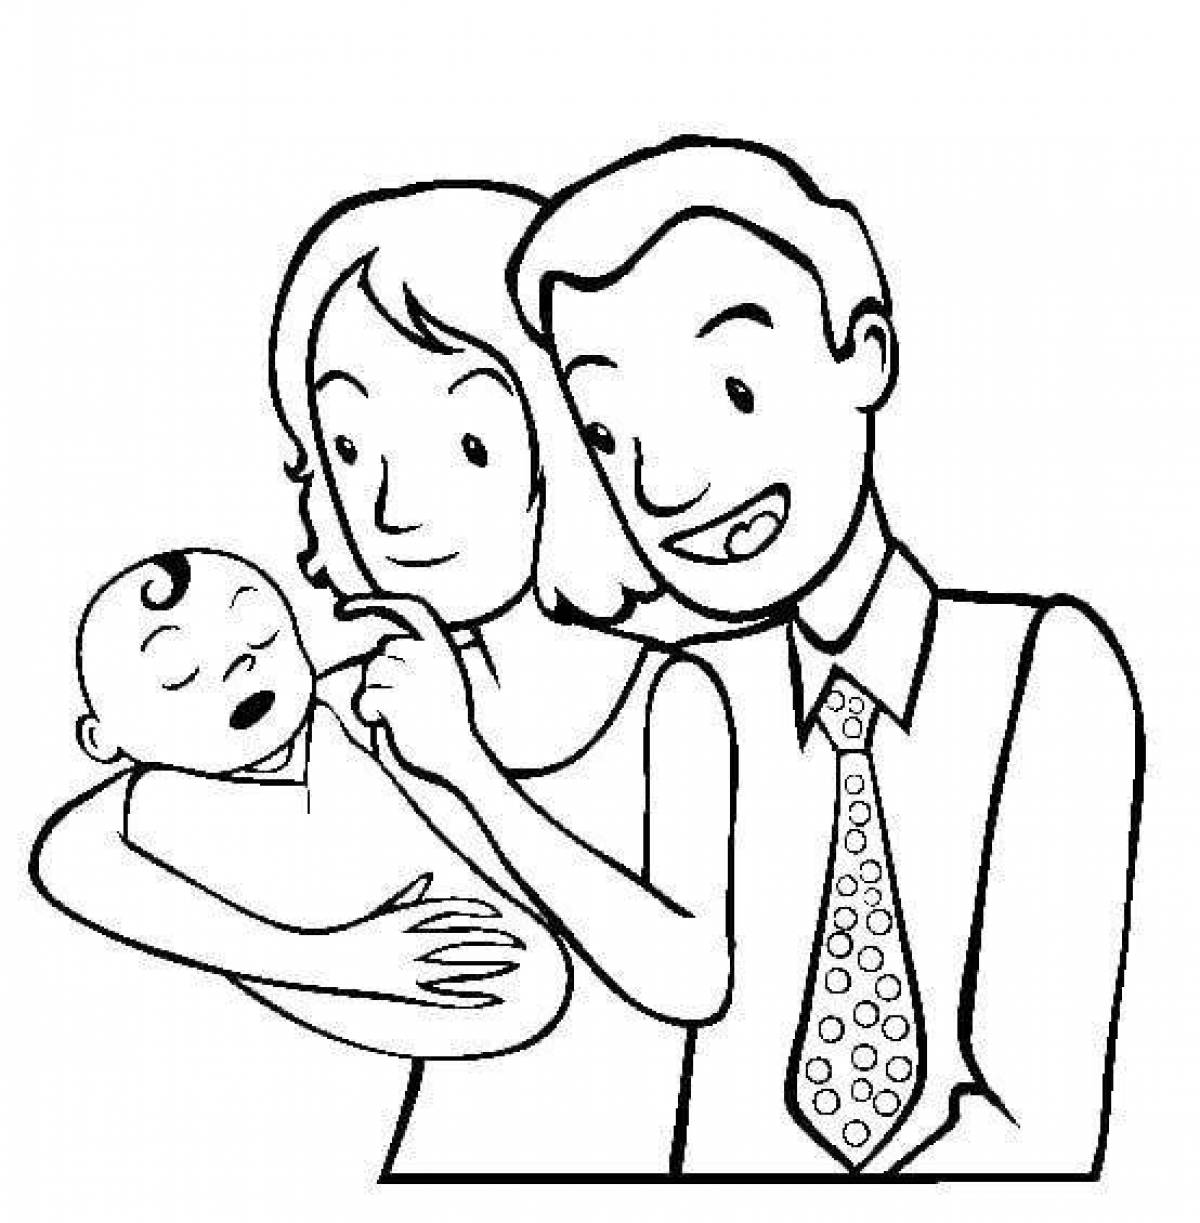 Coloring book harmonious mom and dad